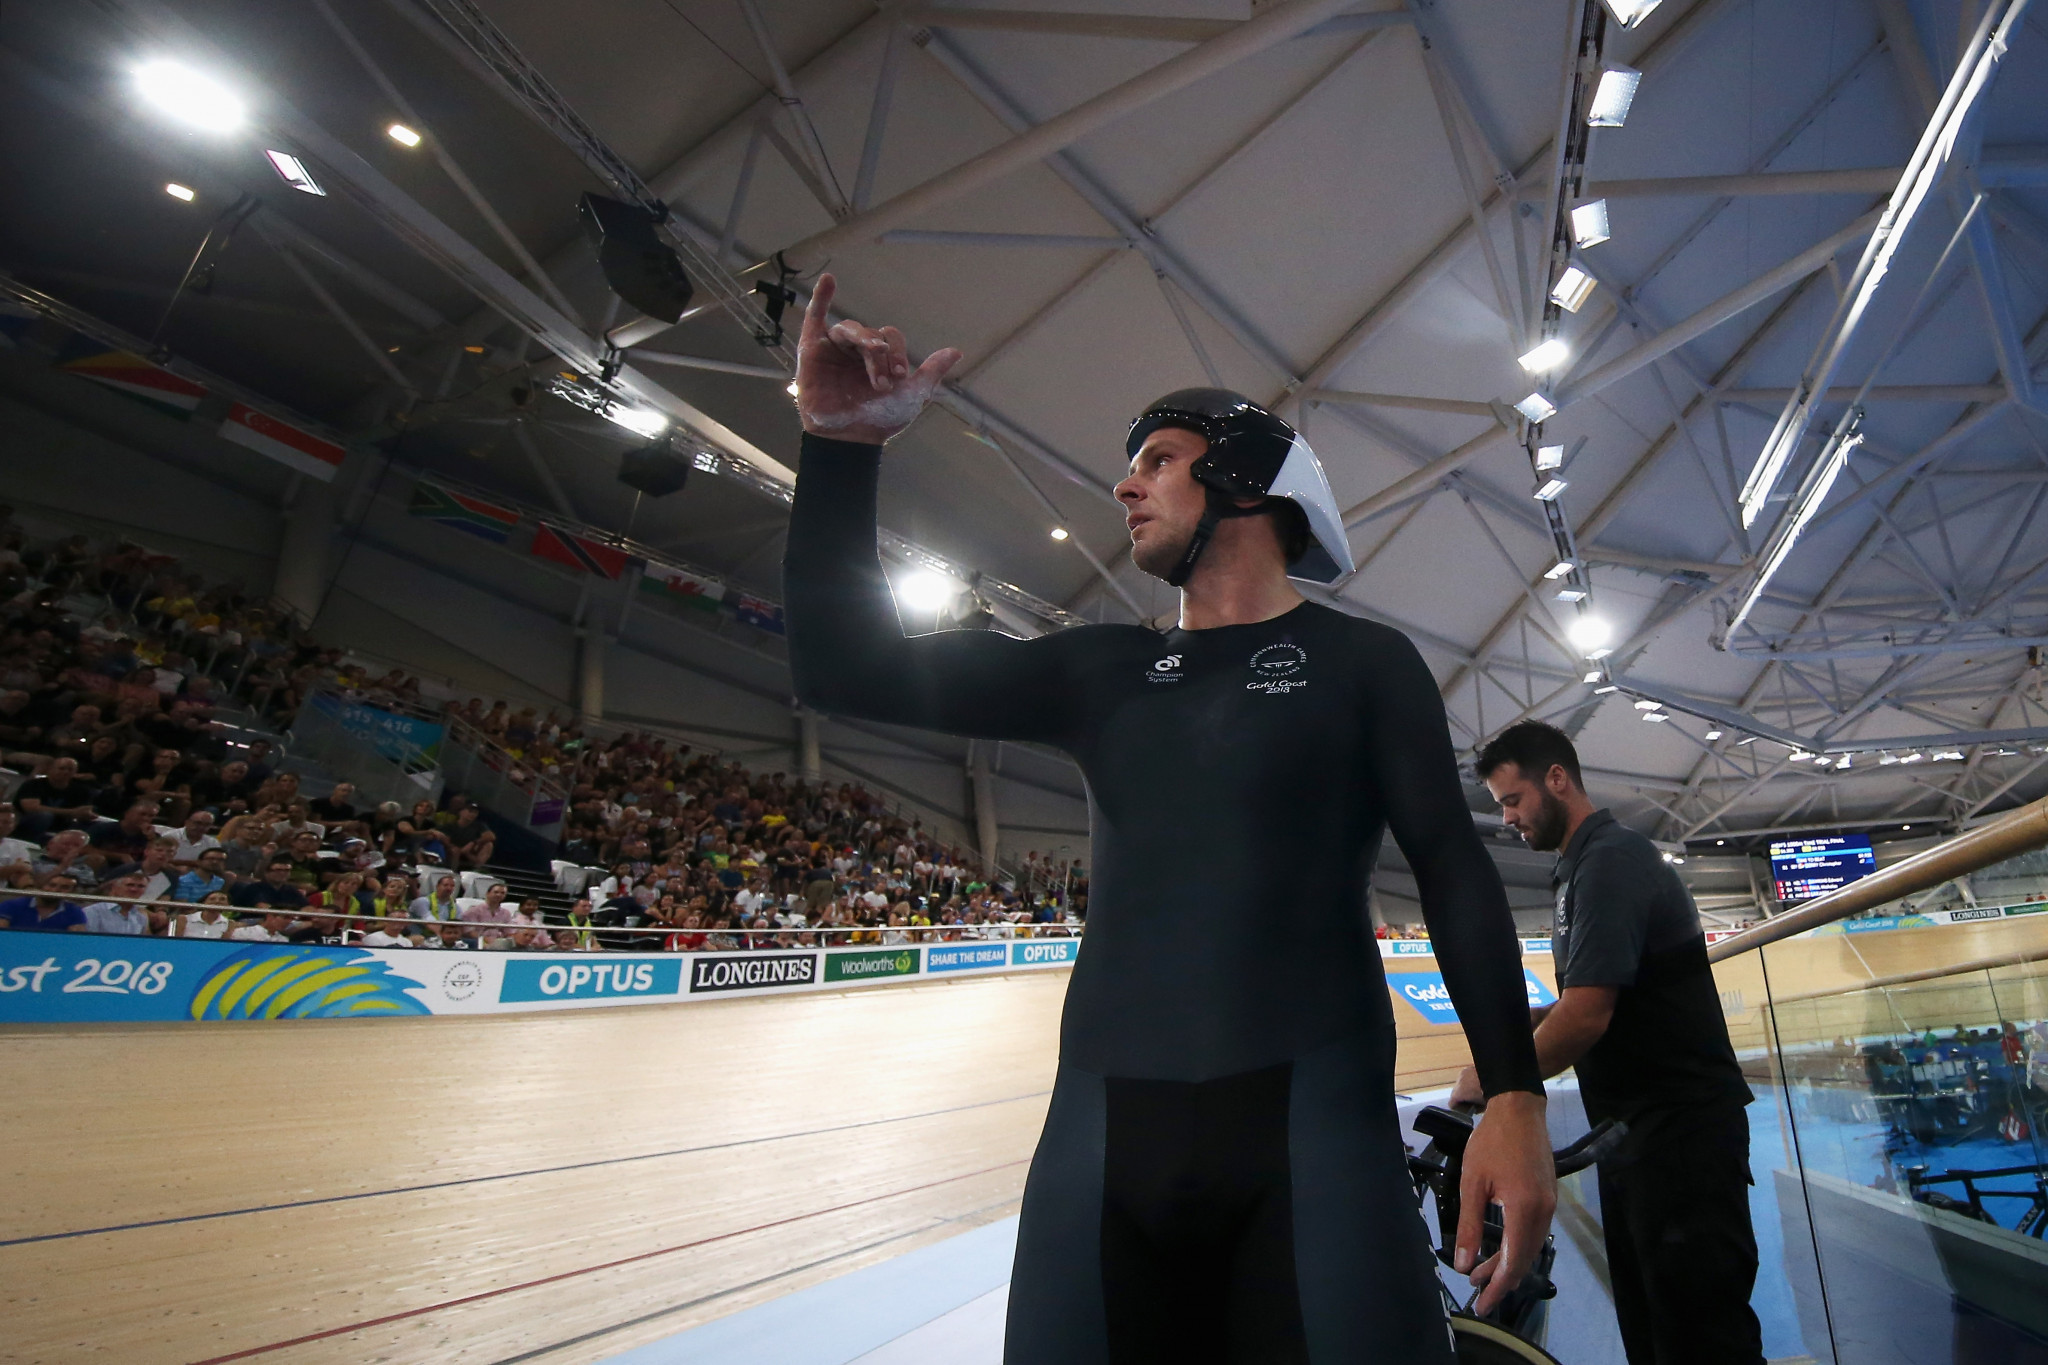 Eddie Dawkins has transitioned from track cycling to bobsleigh ©Getty Images